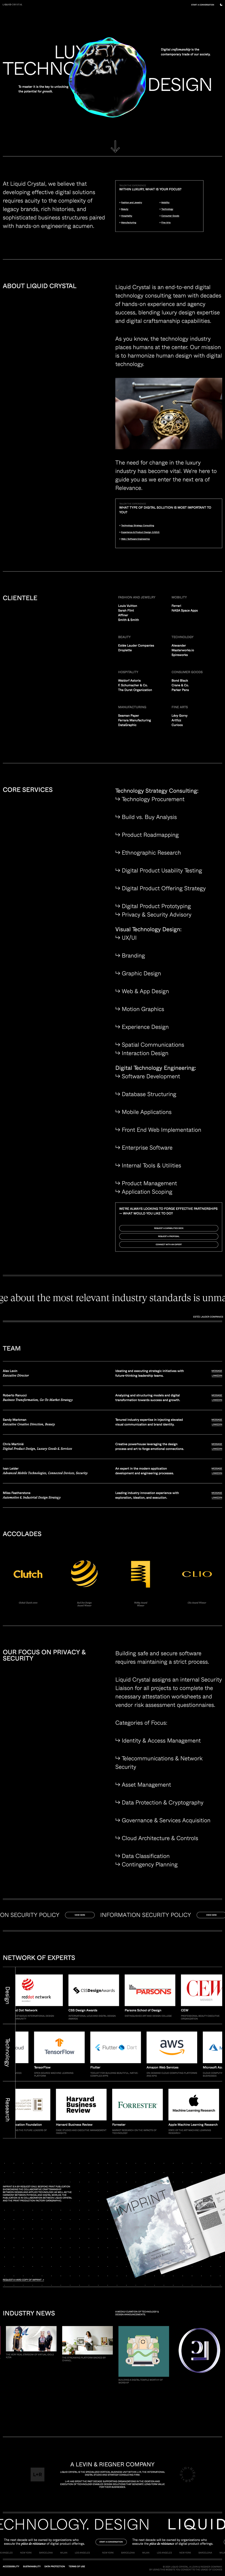 Liquid Crystal Landing Page Example: Liquid Crystal is an end-to-end consulting team with decades of industry experience and agency success, blending luxury expertise and digital craftsmanship.